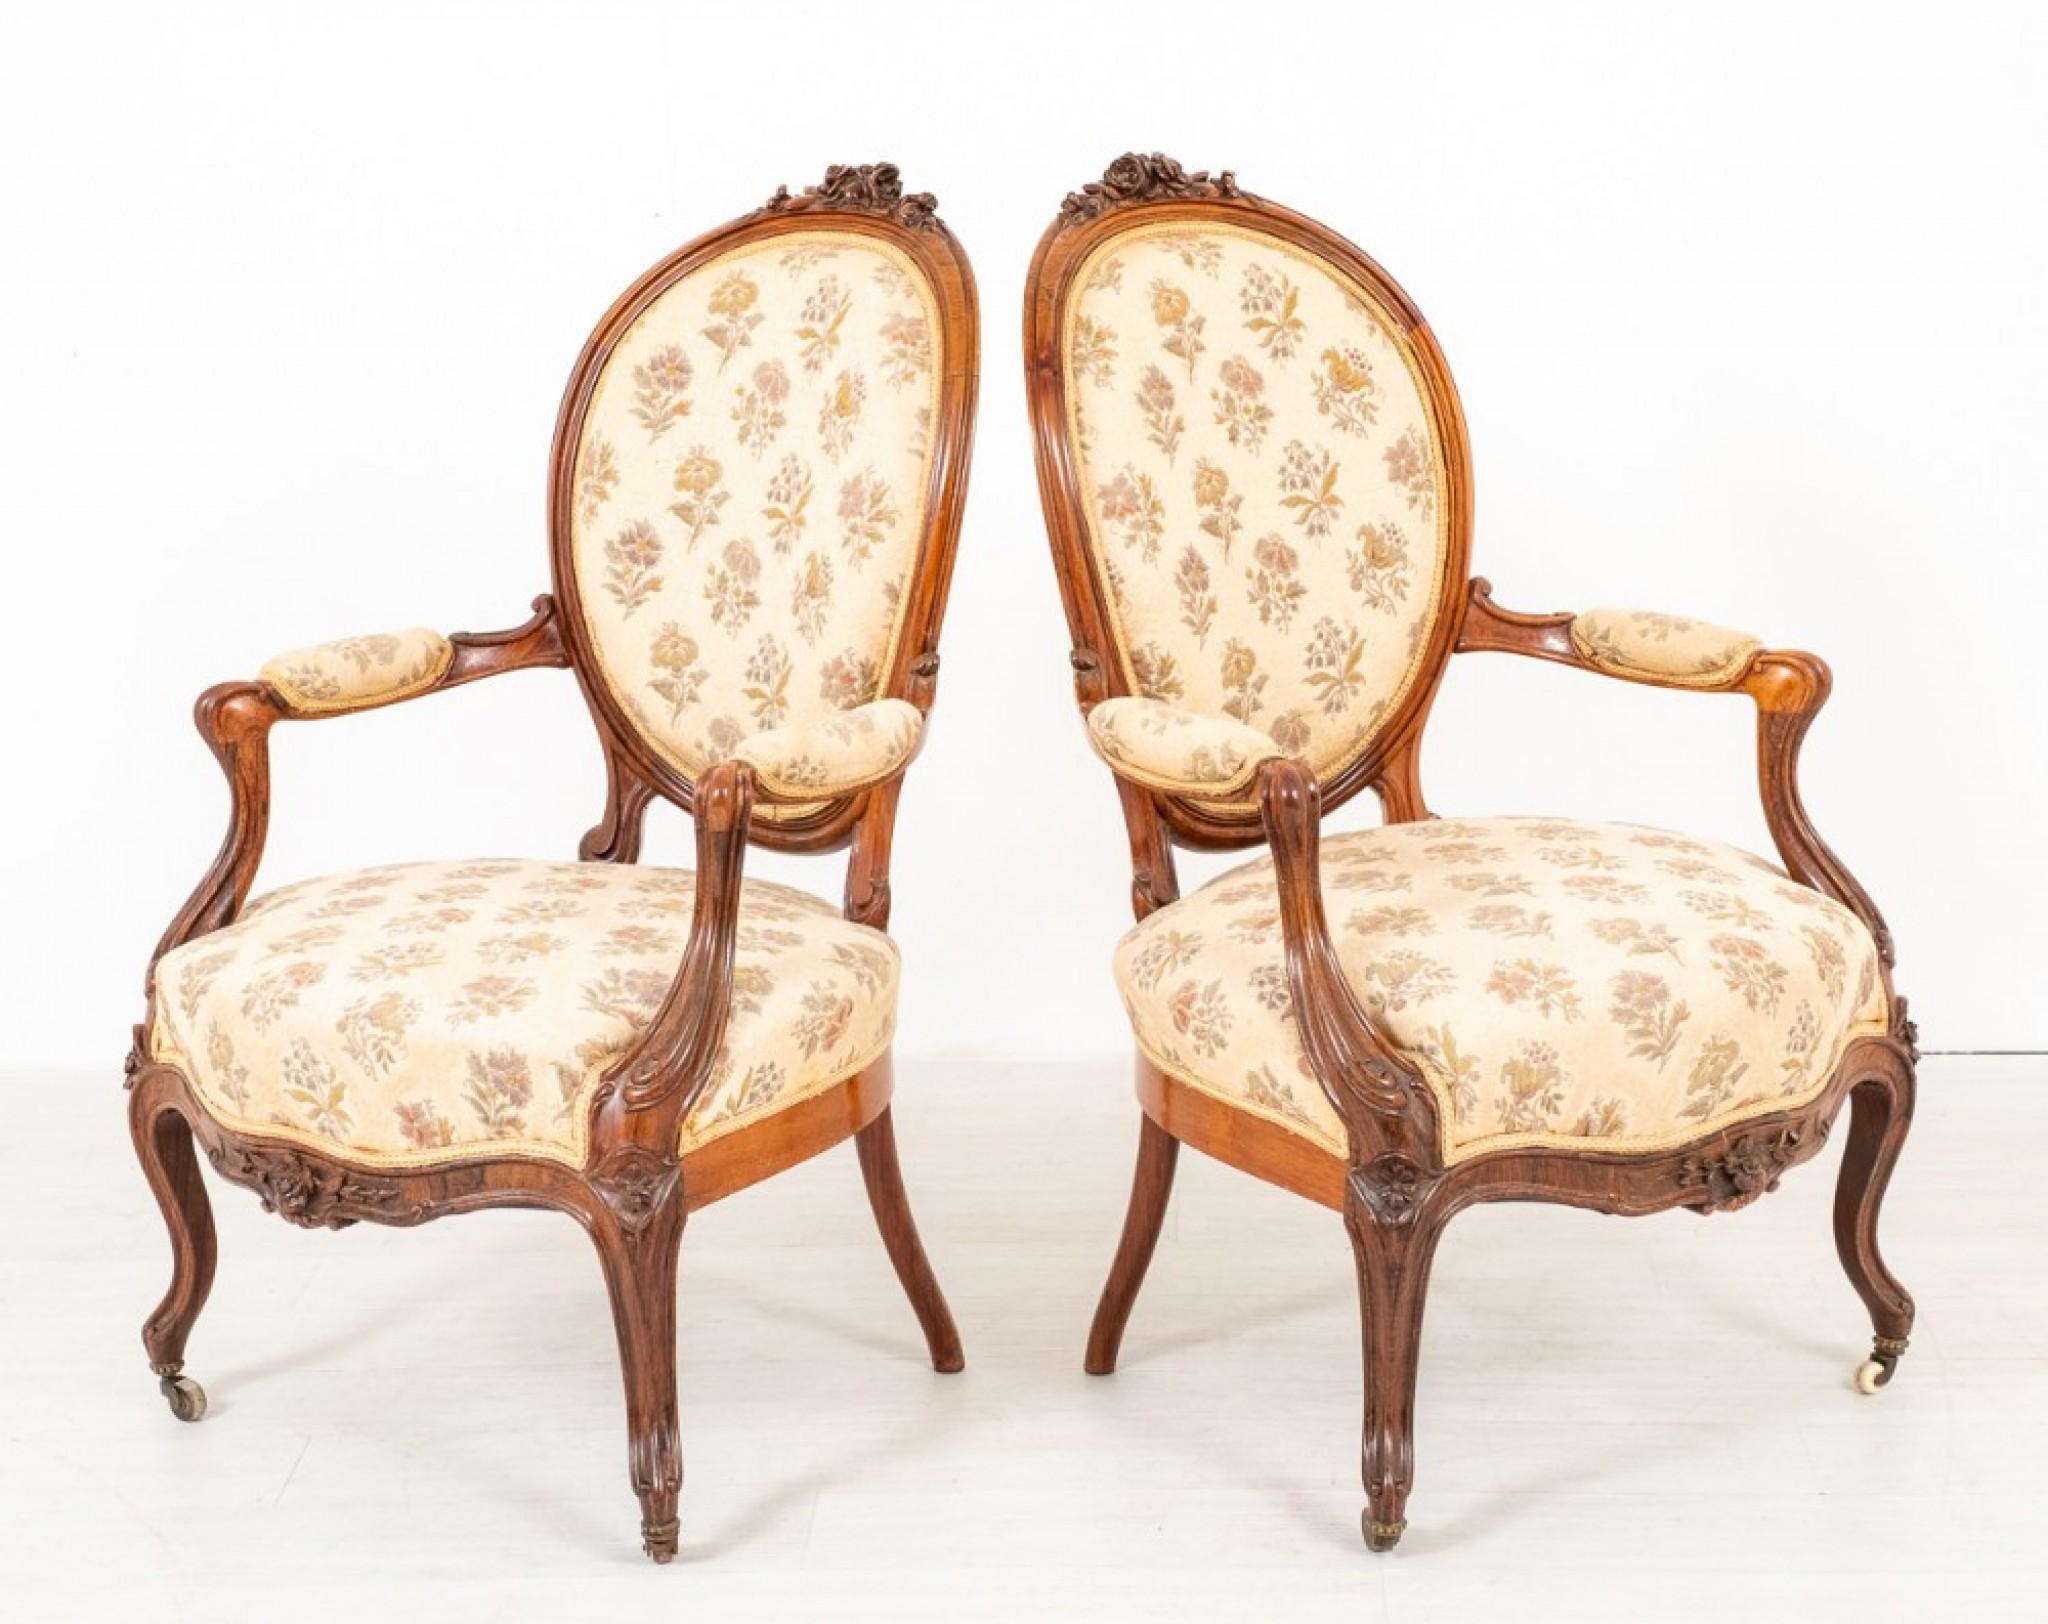 An excellent quality rosewood parlour suite.
Comprising of a shaped settee, a pair of open arm chairs and 2 single chairs.
circa 1860
Each of the pieces are raised upon cabriole legs with wood show frames.
Note the excellent quality of the